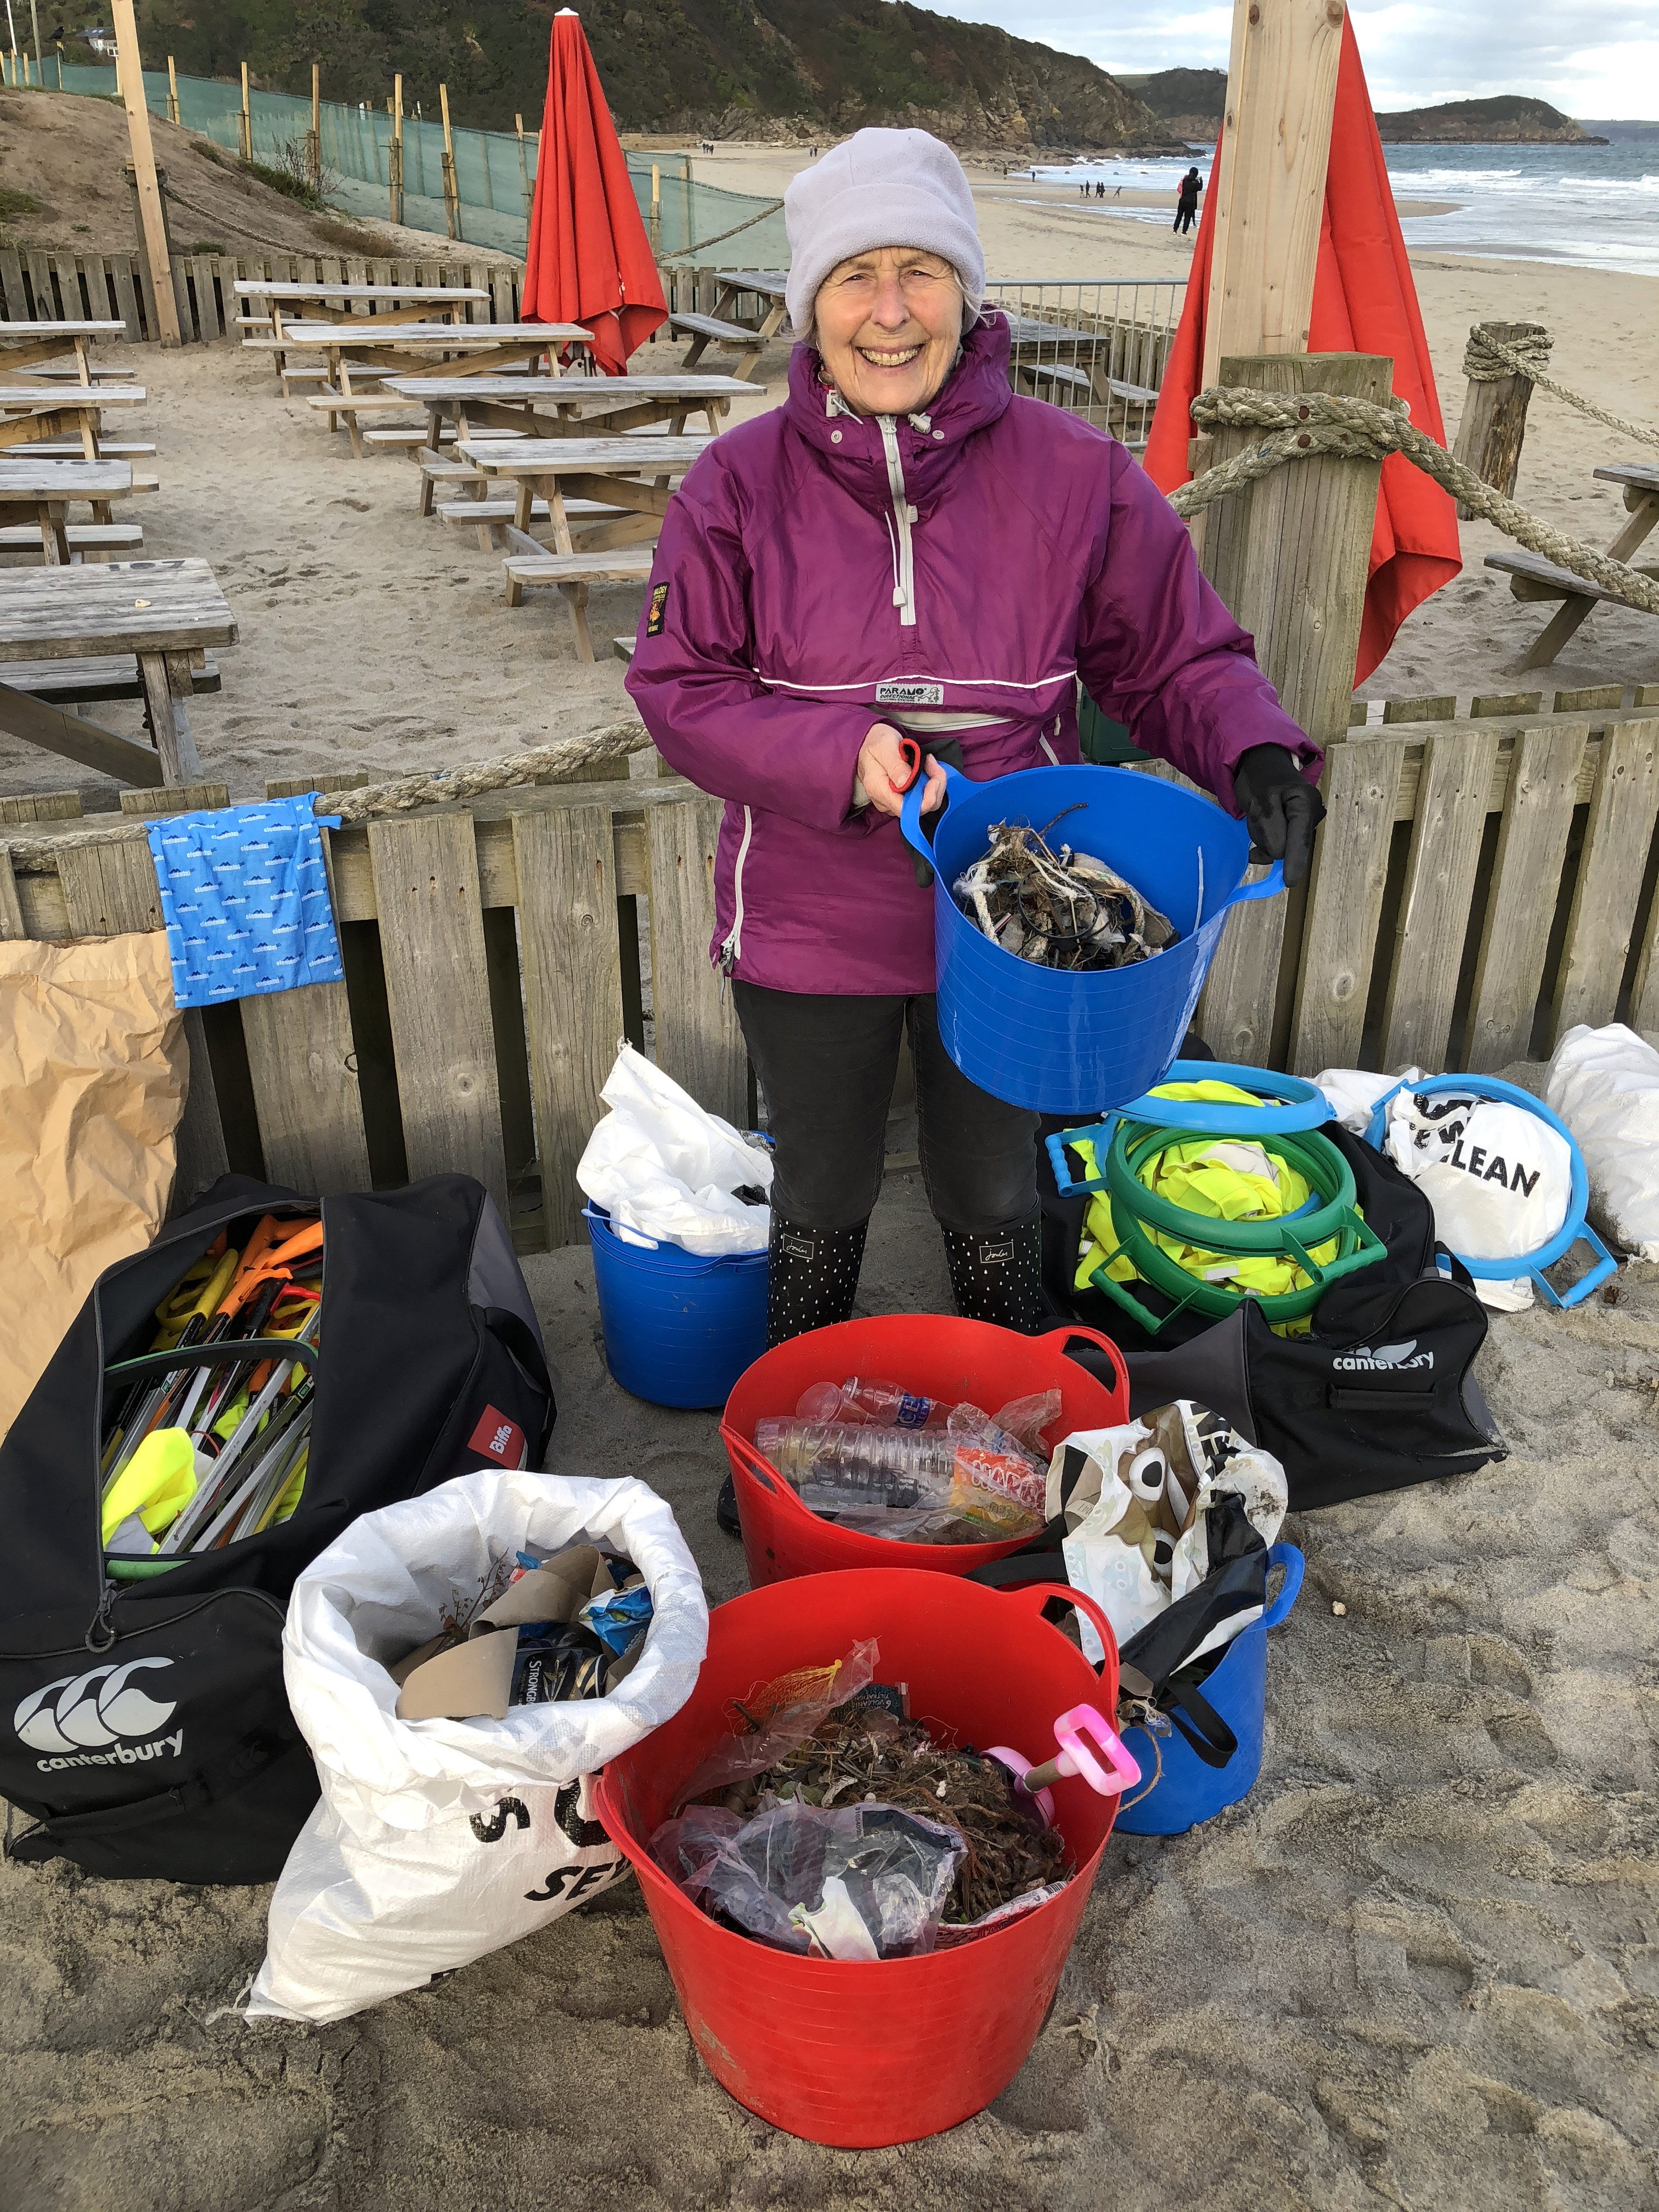 52 beach cleans in 2018 was my New Year’s Resolution. The ambitious goal came to her after watching a documentary on plastic pollution the previous year, and she knew she couldn’t sit idly by.